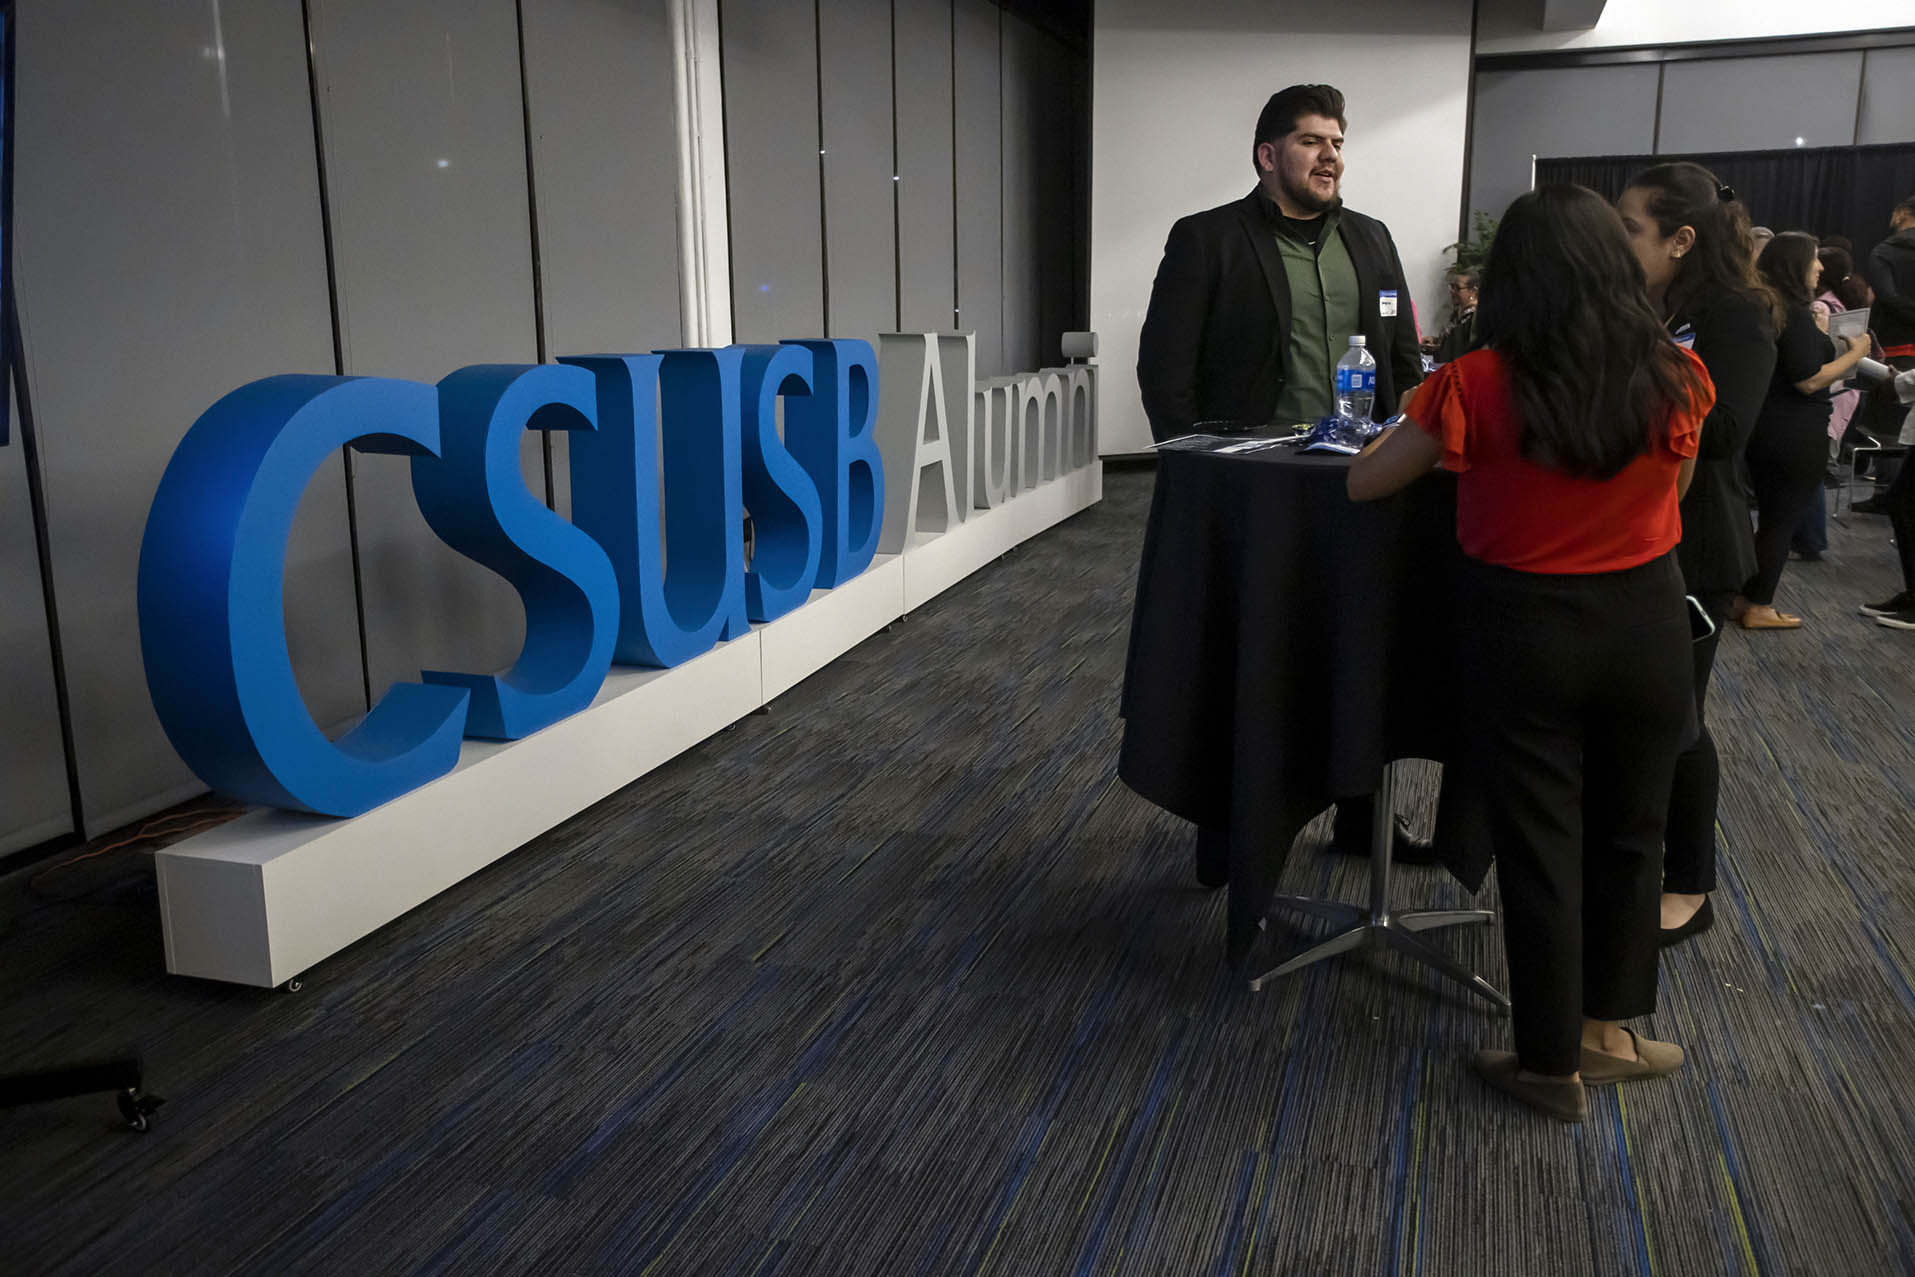 People networking at the Amazon-CSUSB Alumni career event.